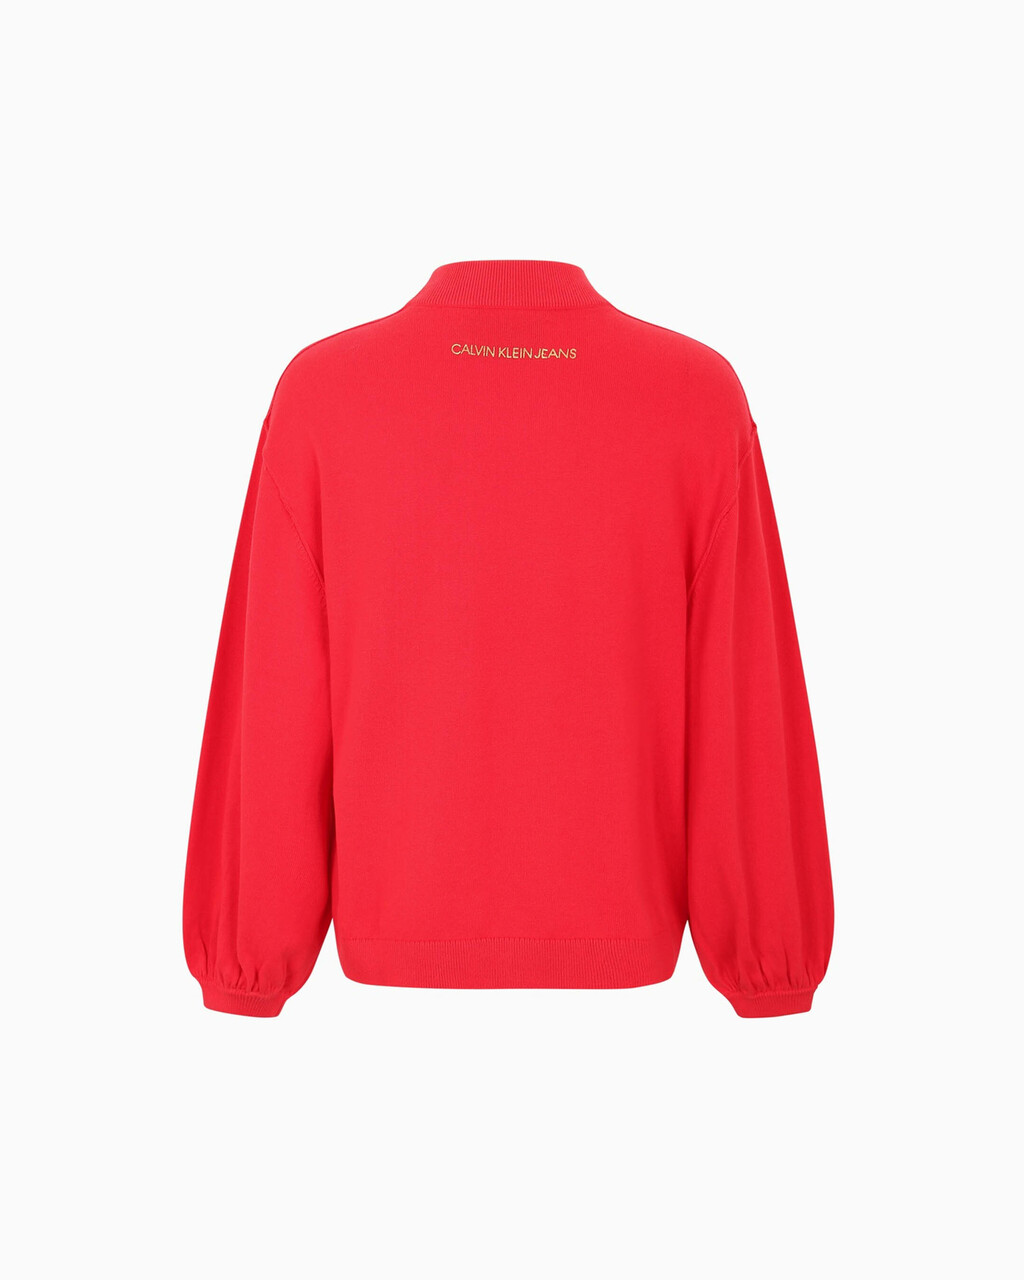 CHINESE NEW YEAR CAPSULE PULLOVER SWEATER